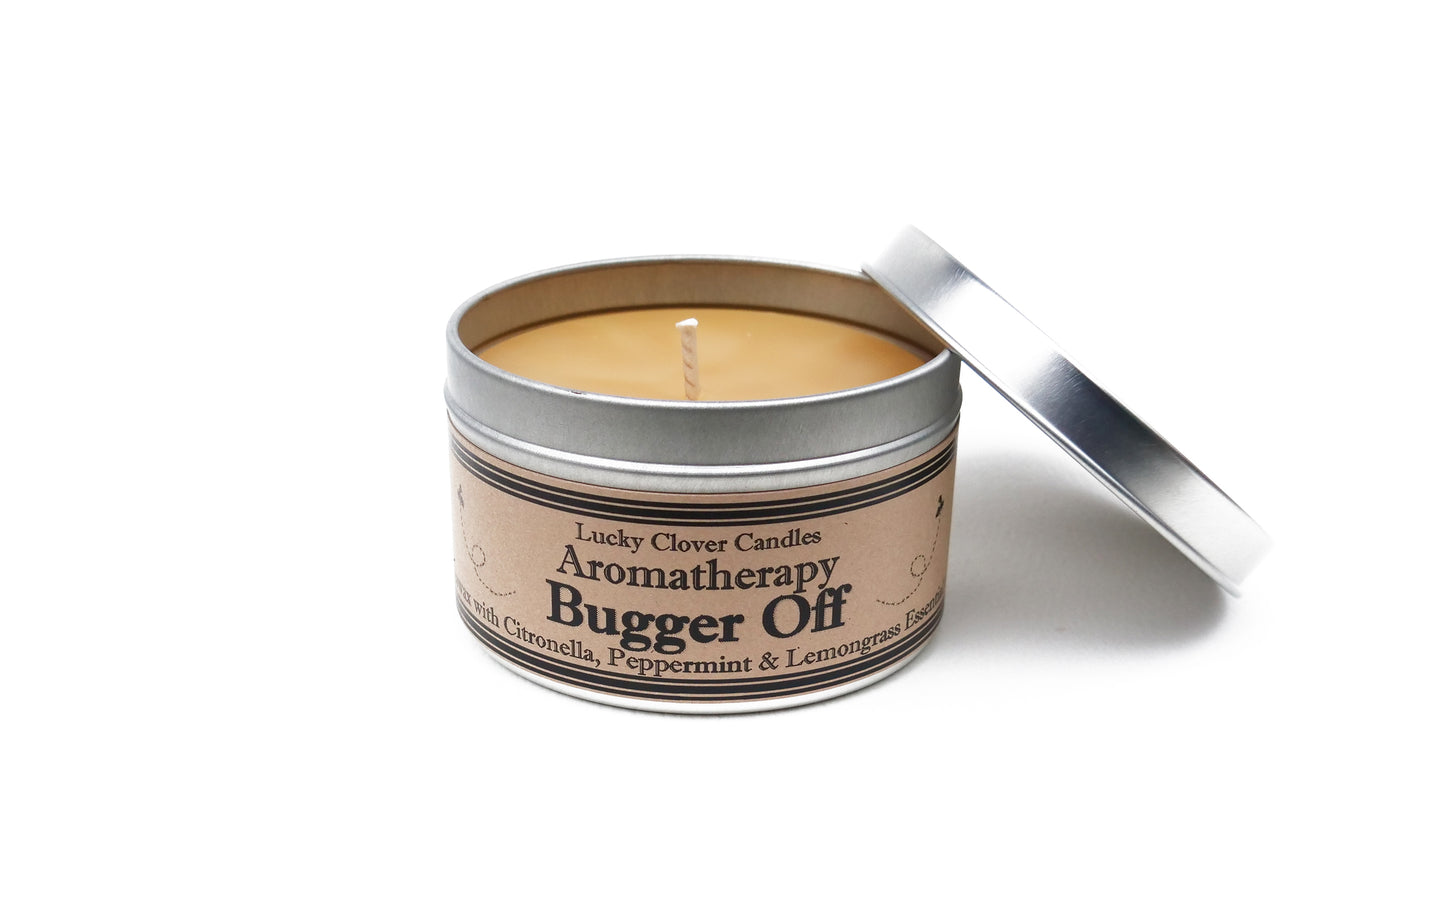 Bugger Off Aromatherapy Beeswax Candle - 8 oz